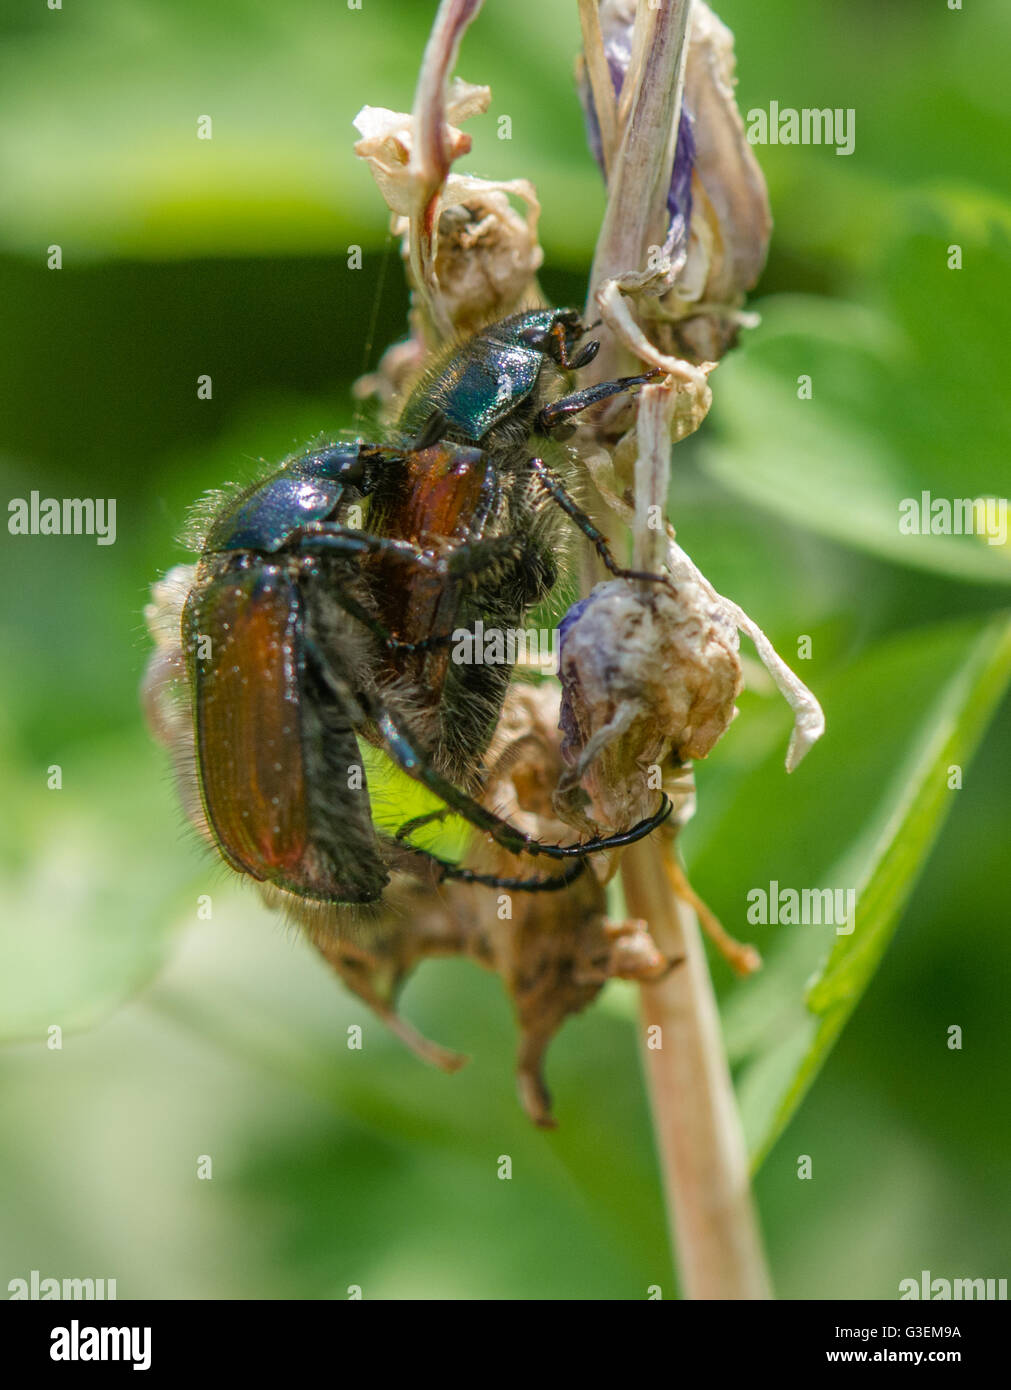 The adult European chafer beetle. Stock Photo